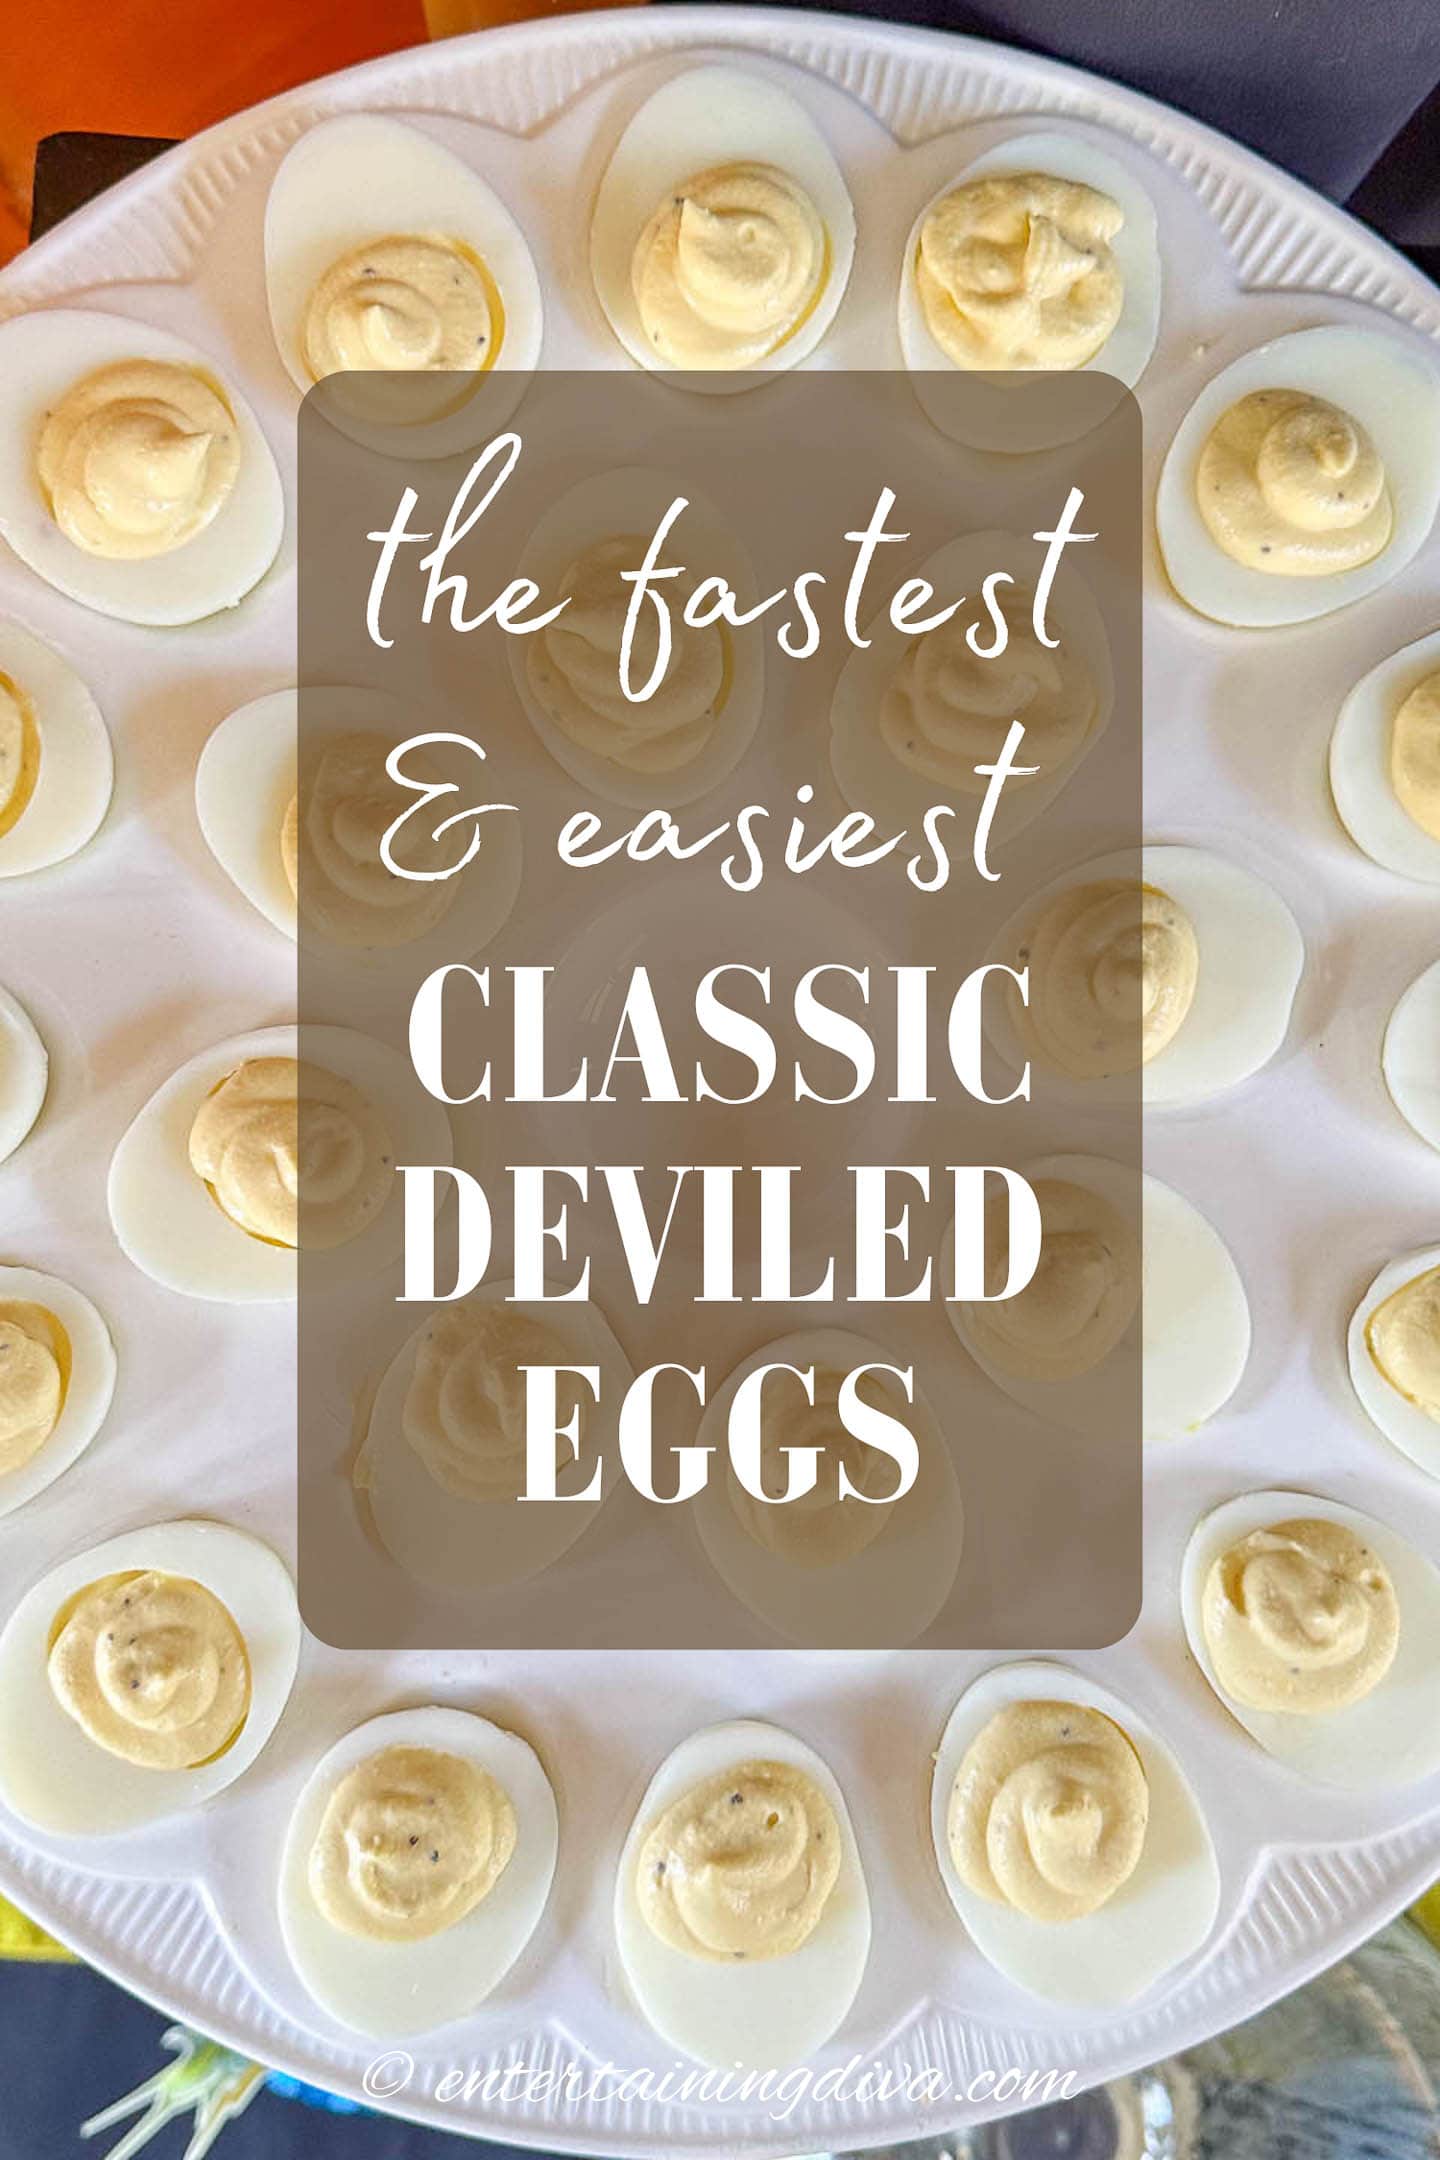 The fastest and easiest classic deviled eggs